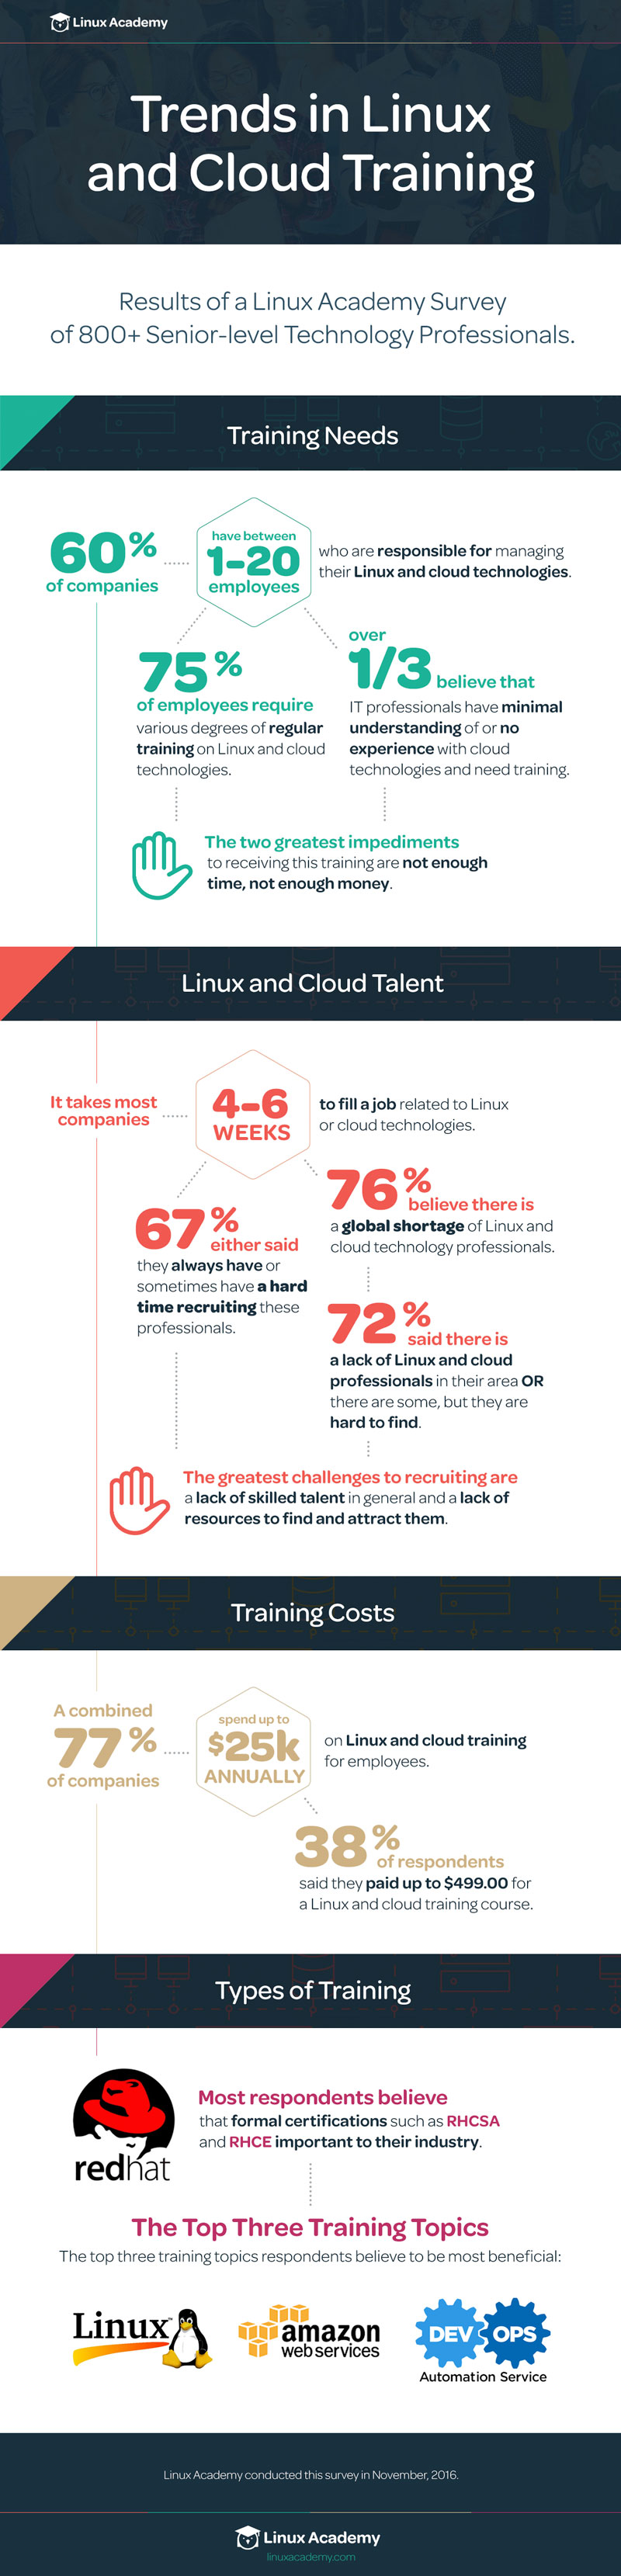 Linux Academy survey results on trends in Linux and cloud training.